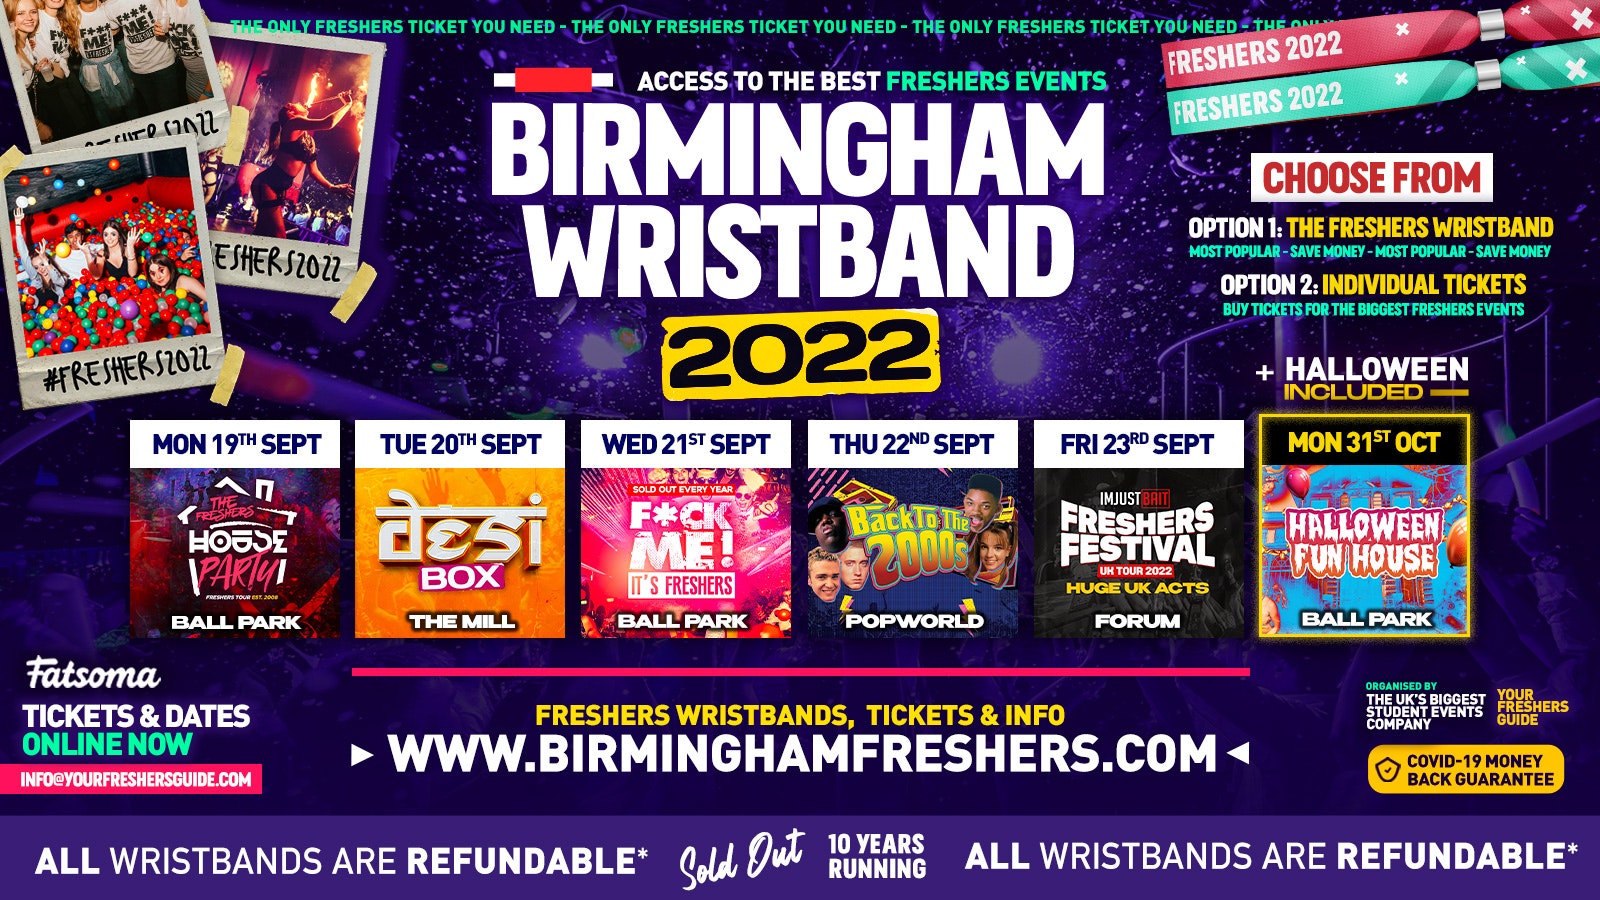 Birmingham Freshers Wristband 2022 – The Official Freshers Pass | The BIGGEST Events in Birmingham’s BEST Clubs! | Birmingham Freshers 2022